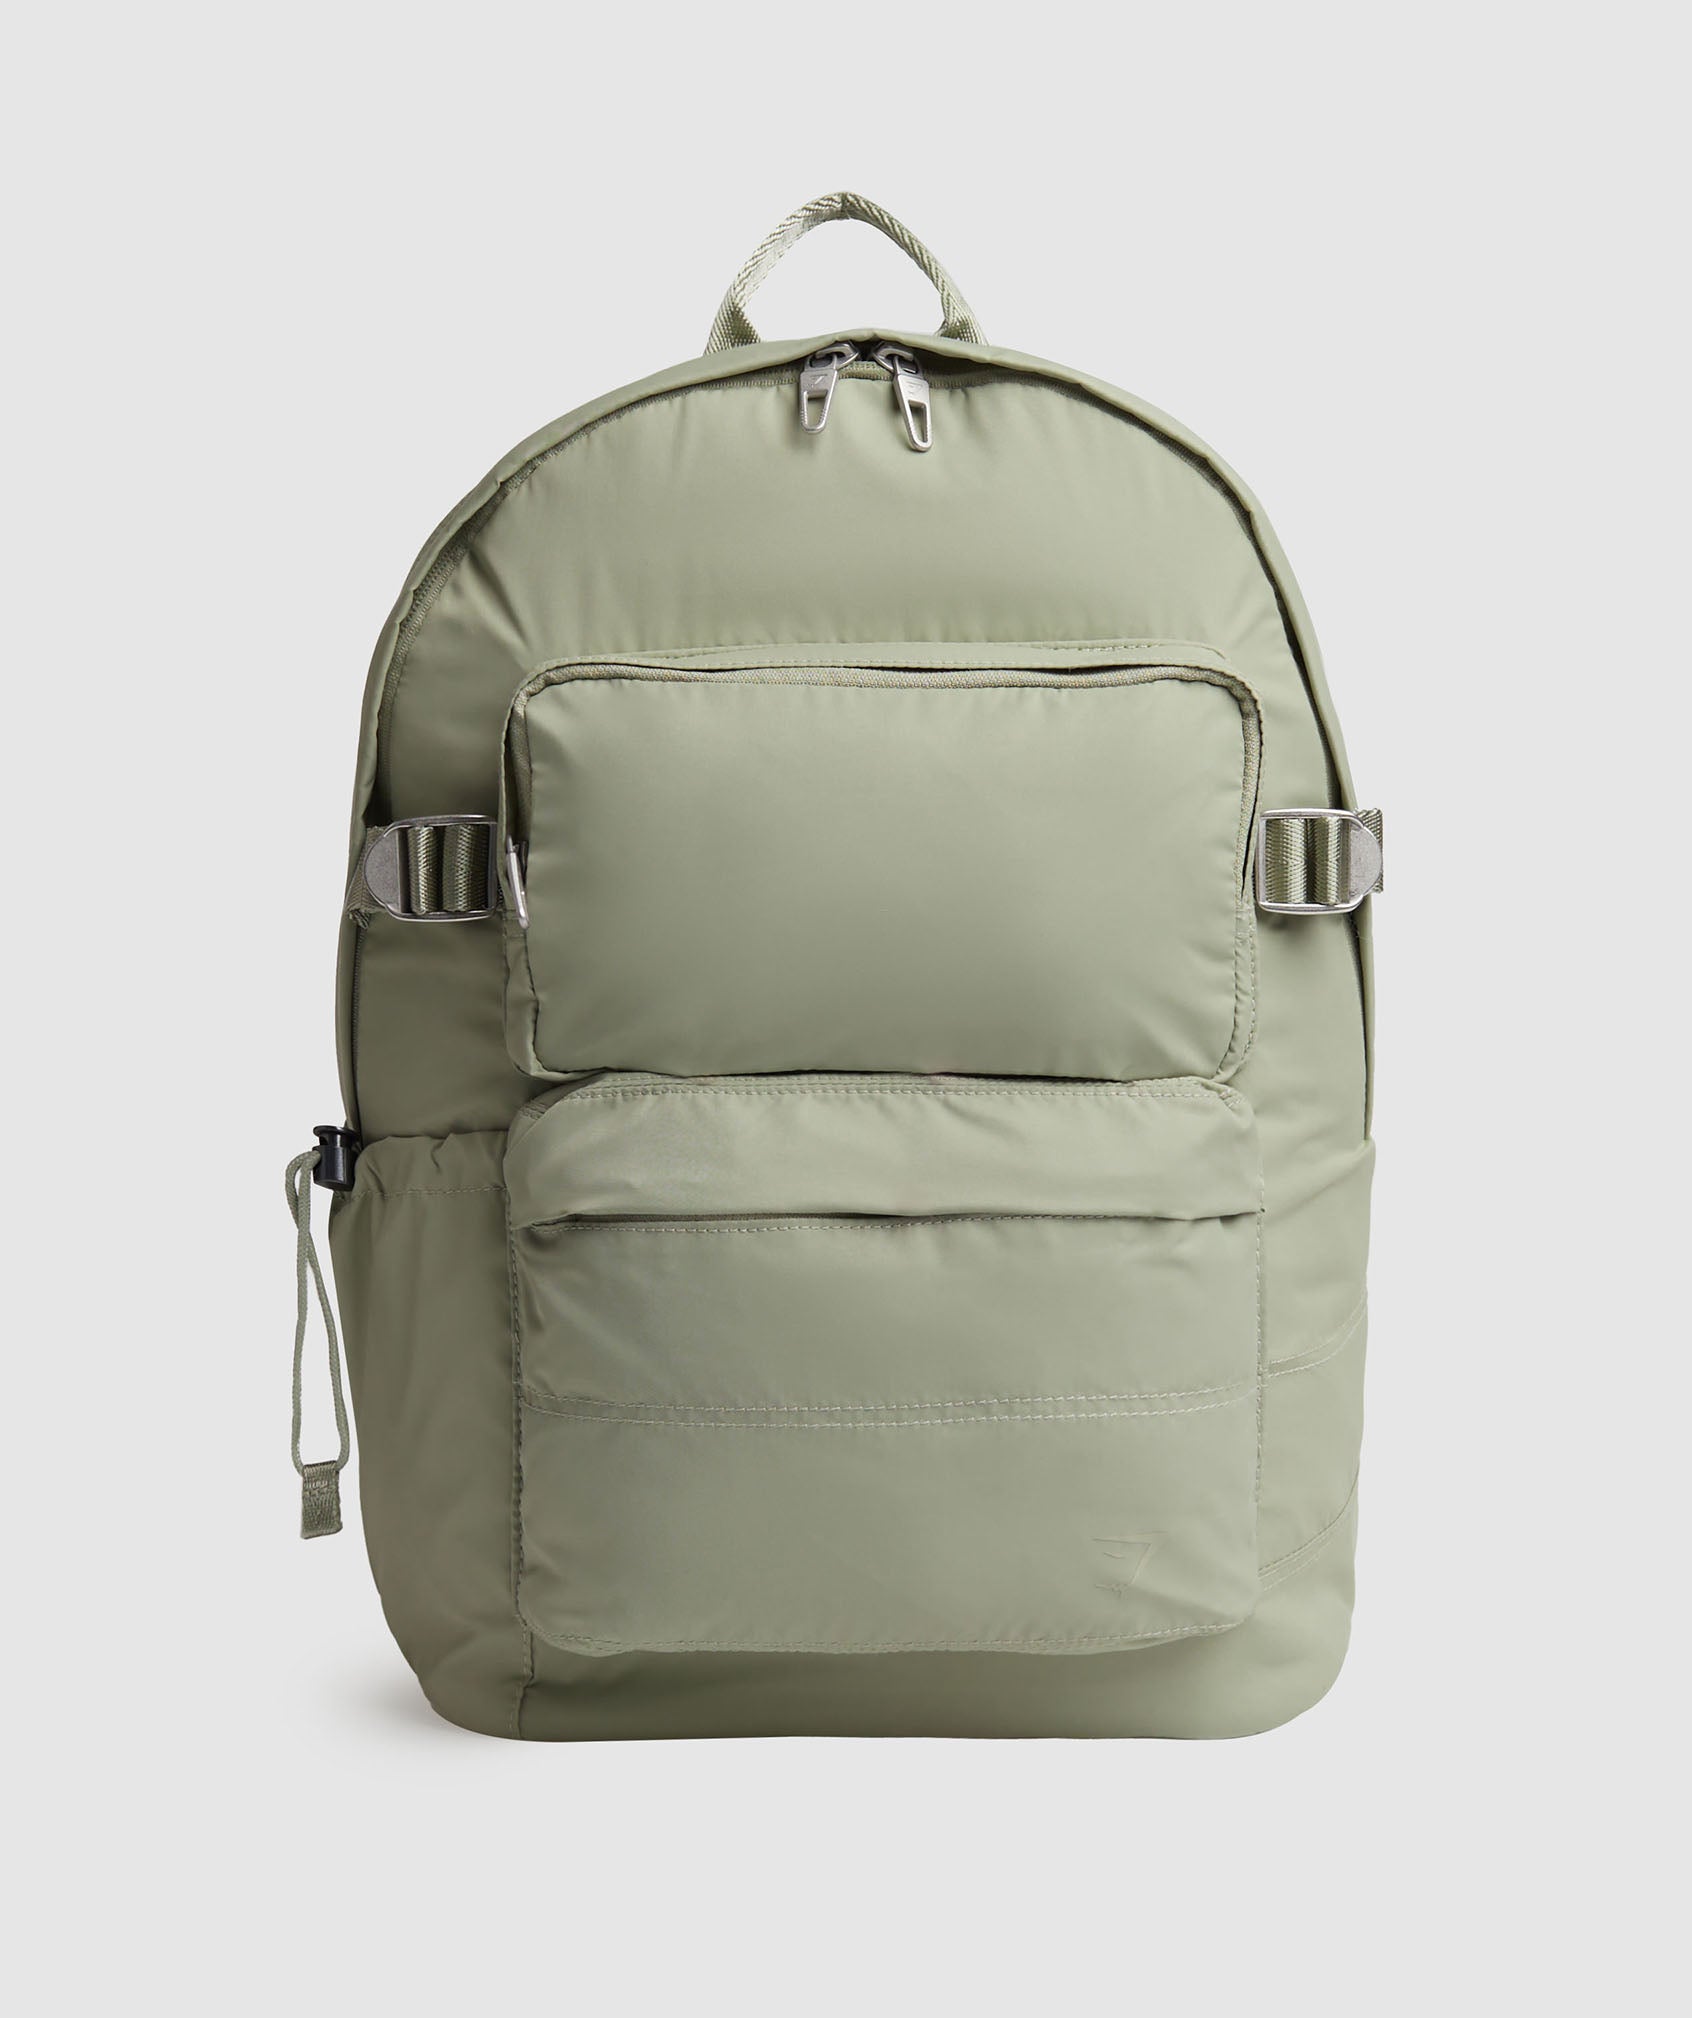 Premium Lifestyle Backpack in Light Olive Green - view 1